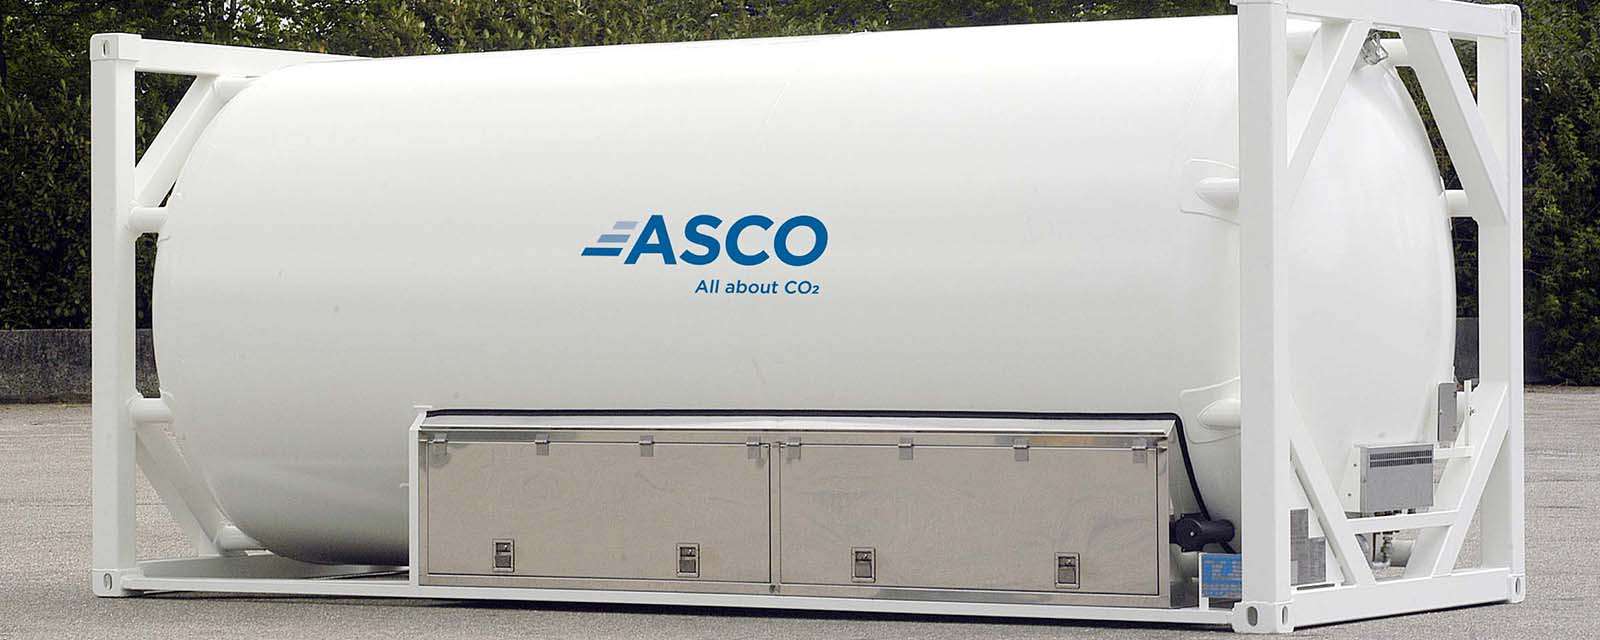 20-iso-tank-container-asco-co2-vietnam-be-chua-co2 va-crogyene-iso-20-4046396-asco-co2-vietnam-ascoco2-vietnam-dai-ly-asco-co2.png